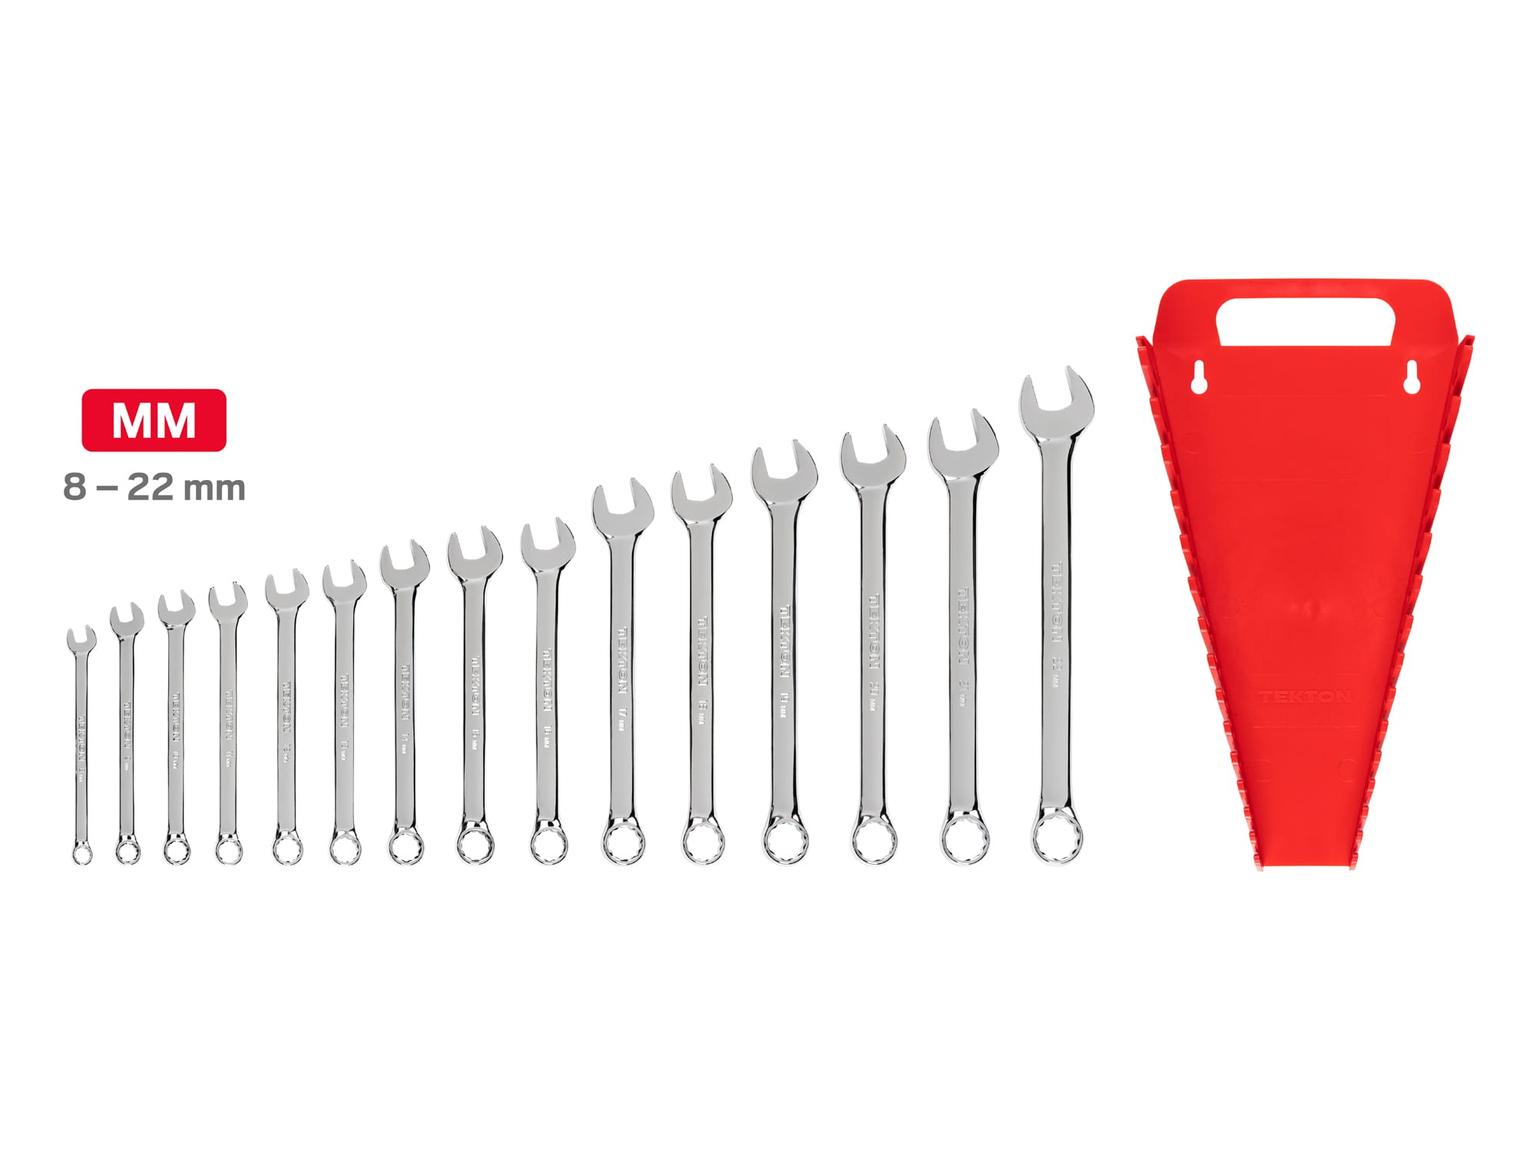 TEKTON 18792-T Combination Wrench Set with Holder, 15-Piece (8 - 22 mm)